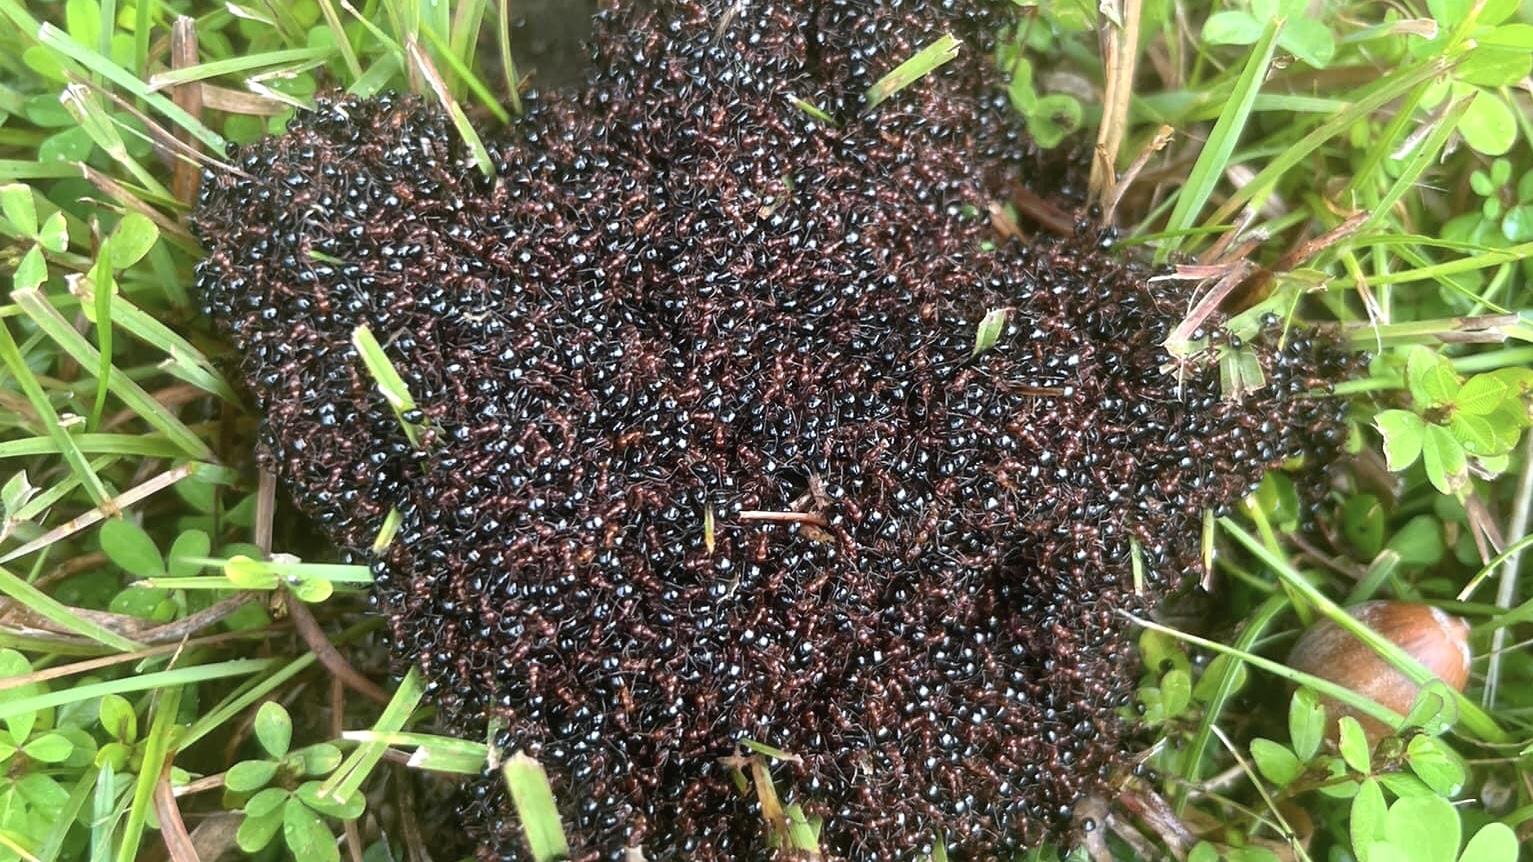 After Recent Rains Flooded Ant Colonies, They Formed Their Own Life Rafts